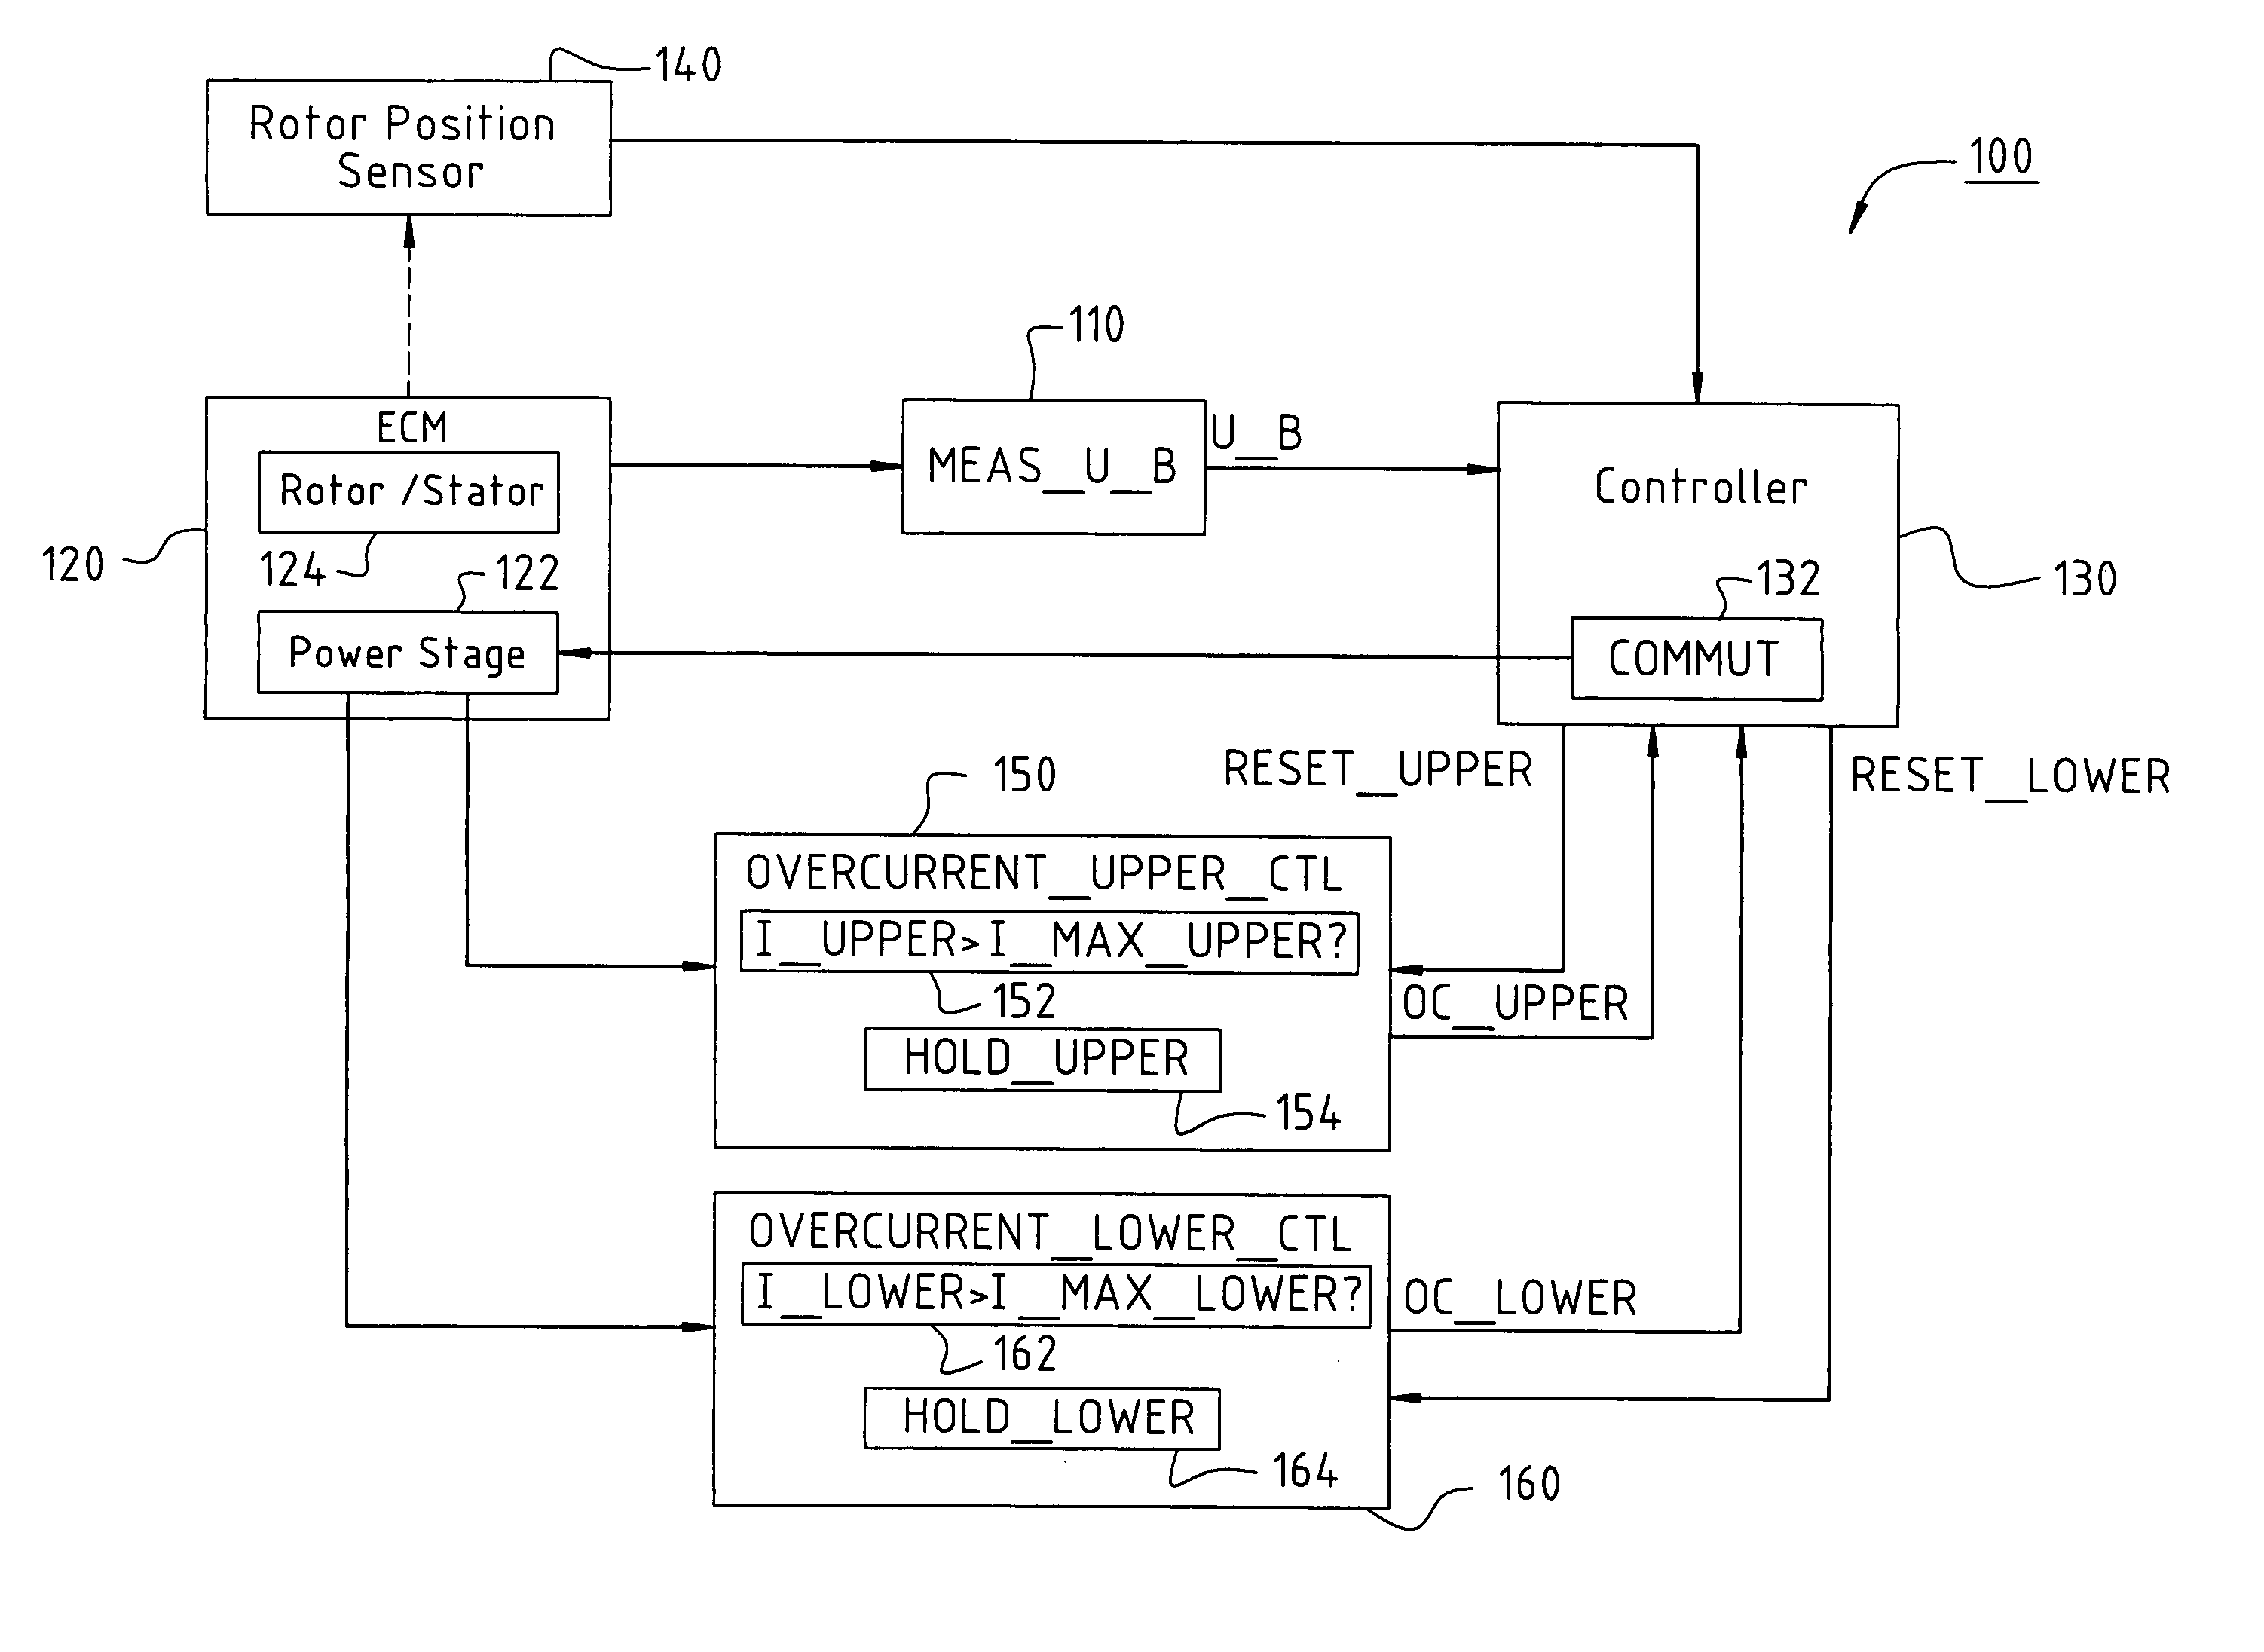 Electronically commutated motor (ECM) and method of controlling an ecm